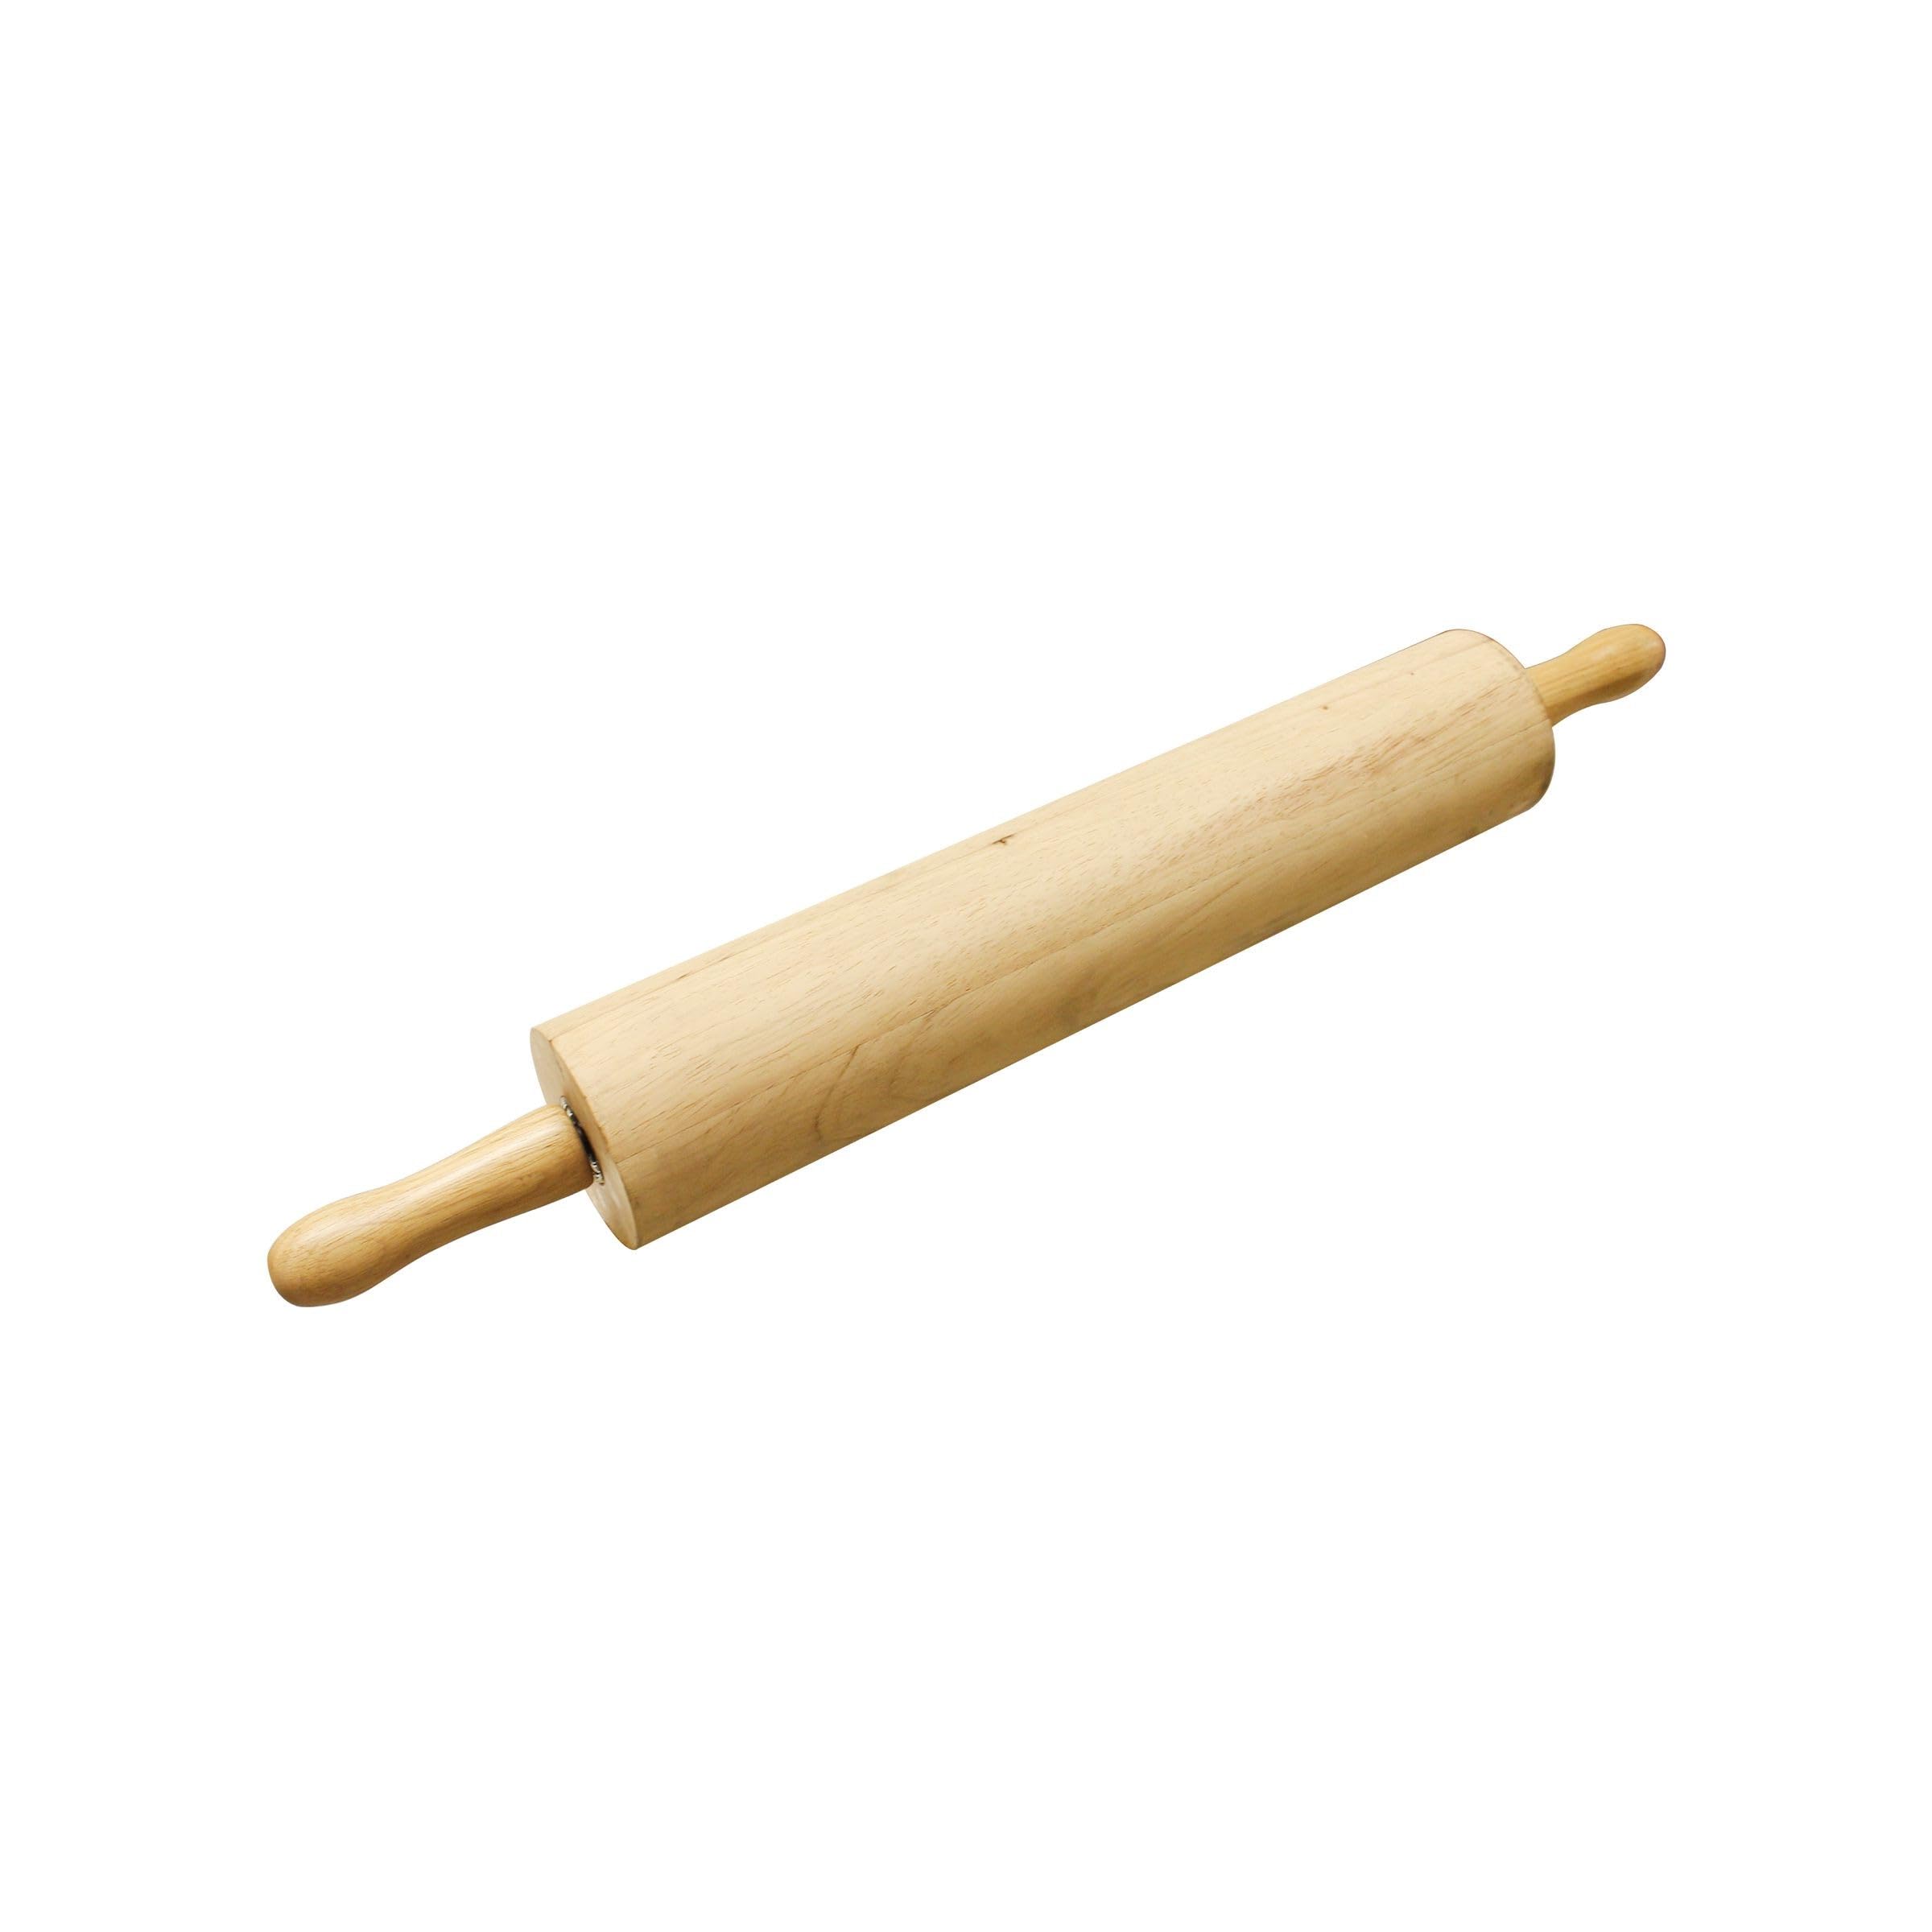 TrueCraftware 18" Wooden Rolling Pin 3-1/4" Diameter- WoodenRoll Pin for Fondant Pie Crust Cookie Pastry Dough Classic Pastry Rolling Pin